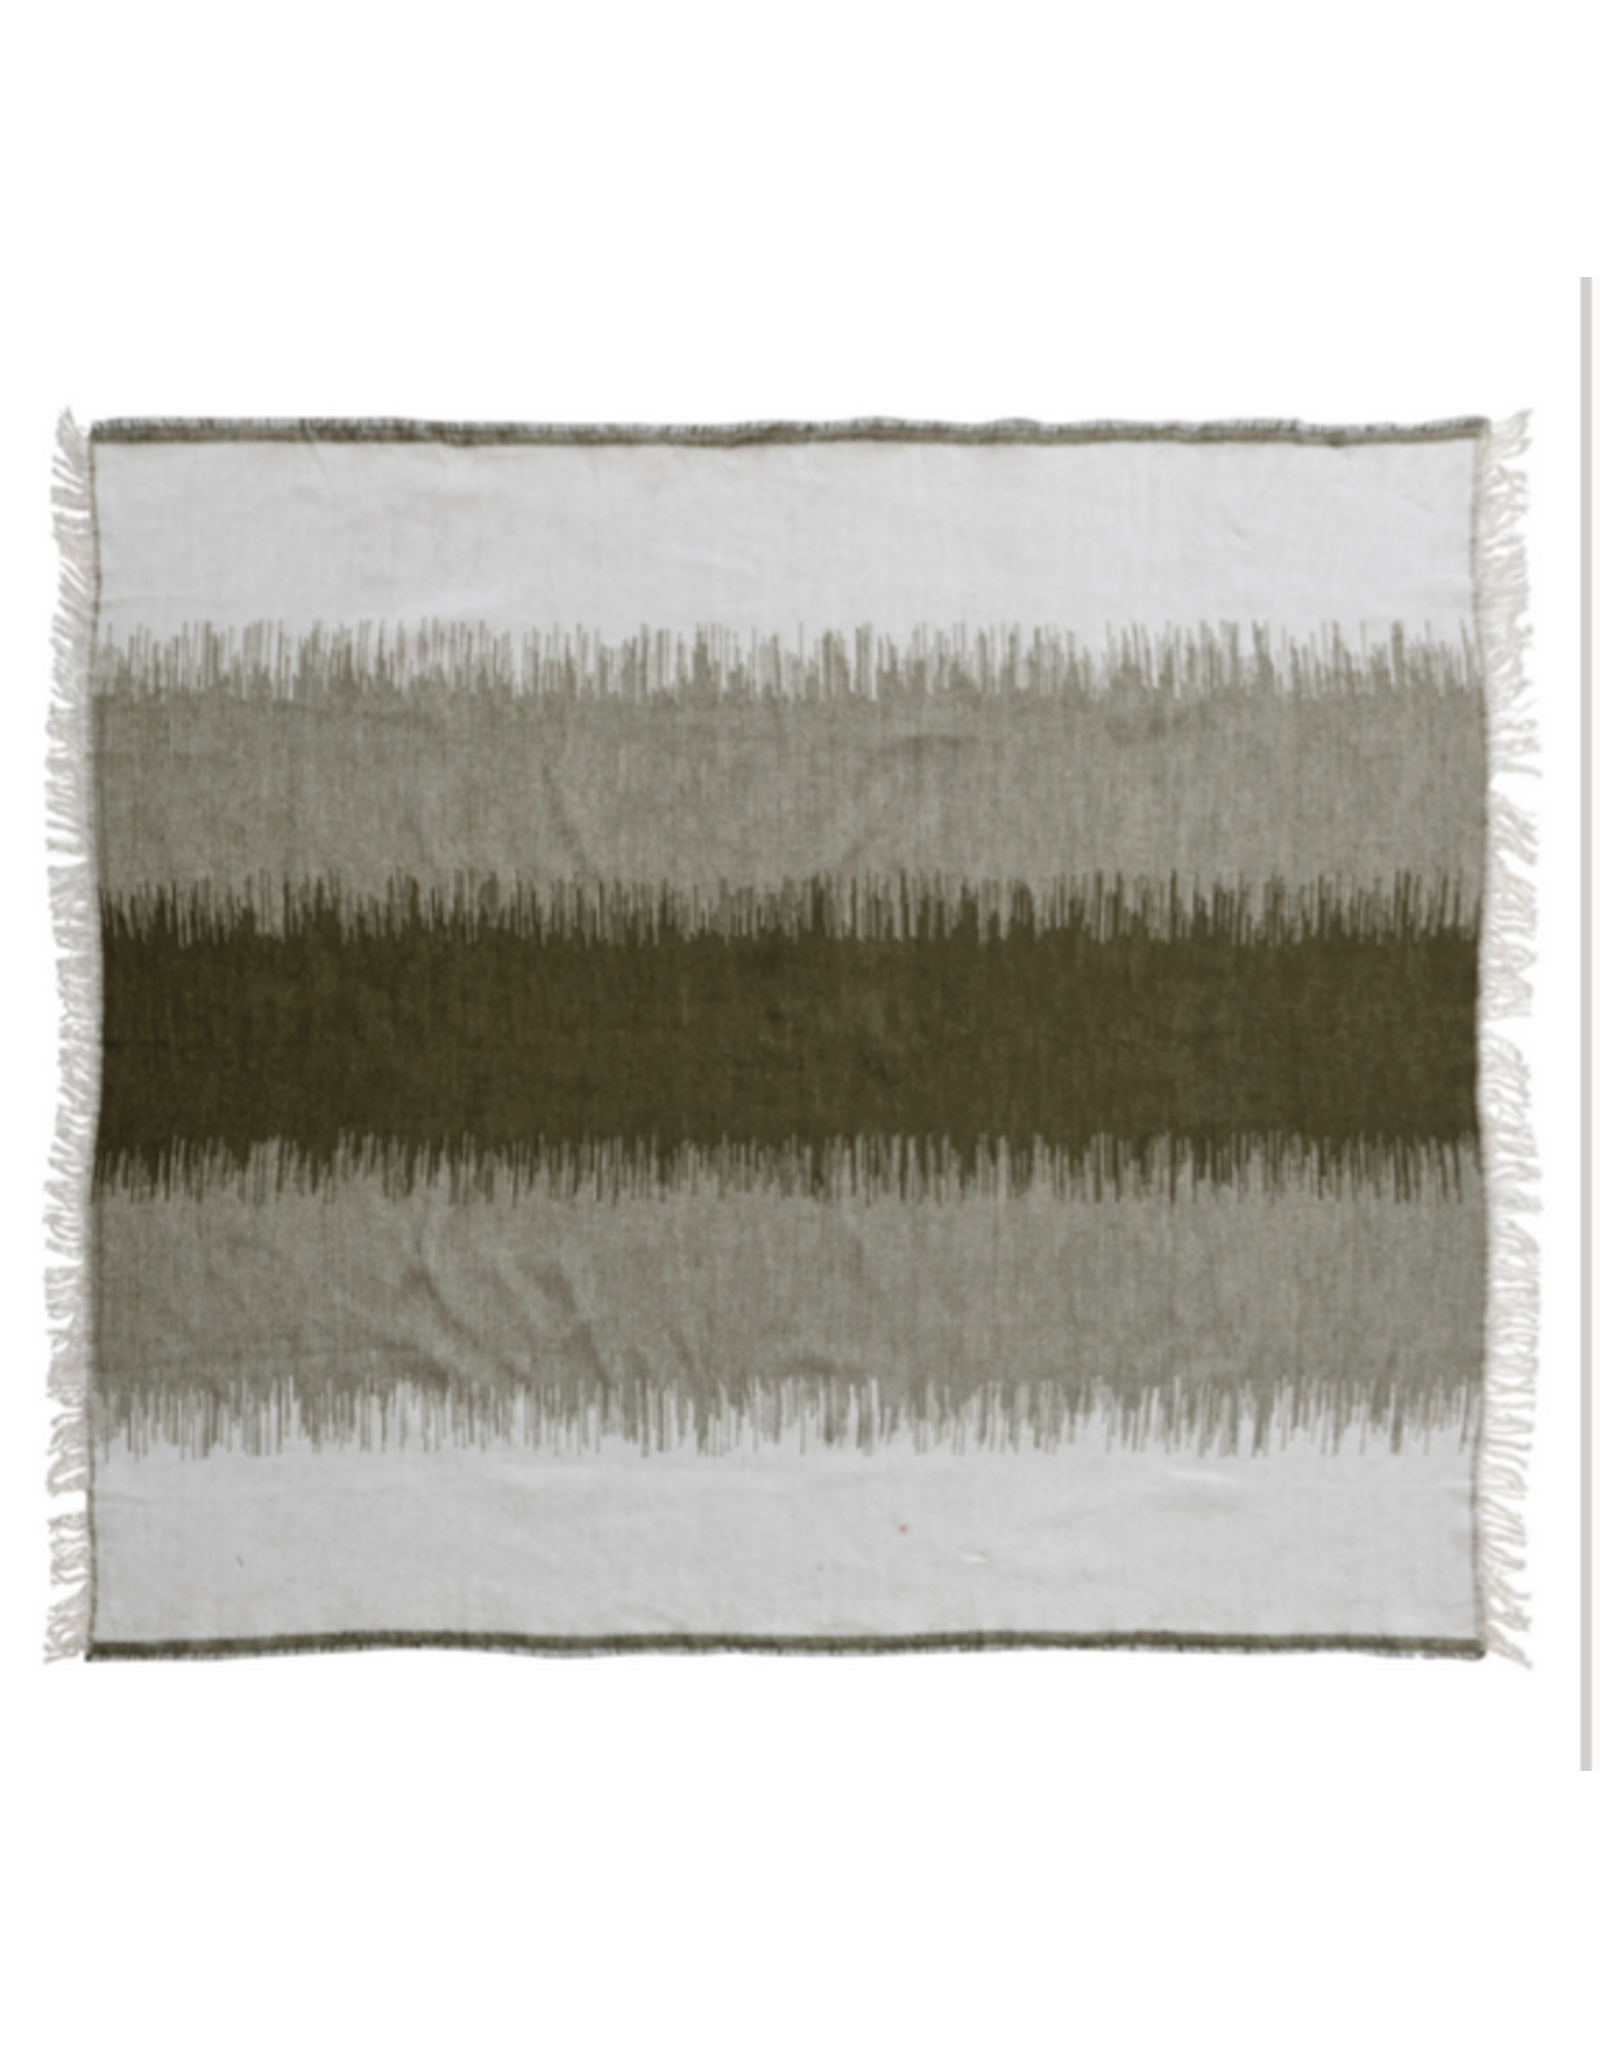 Bloomingville Olive Stripes with Fringe Throw, 50 x 60